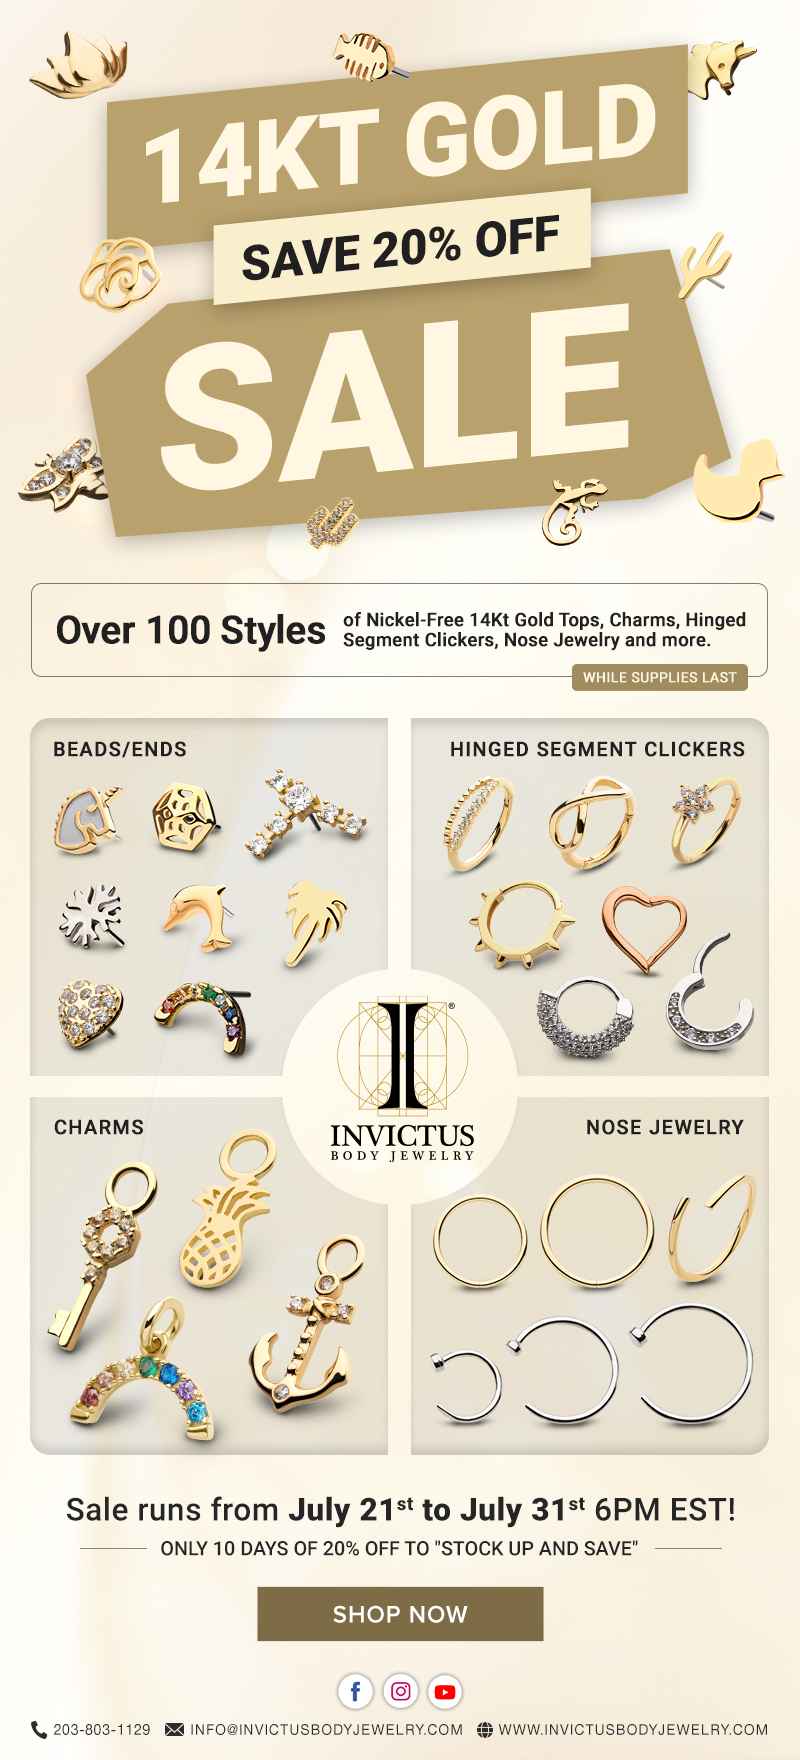 14Kt Gold Sale - Save 20% Off over 100 Select Styles.